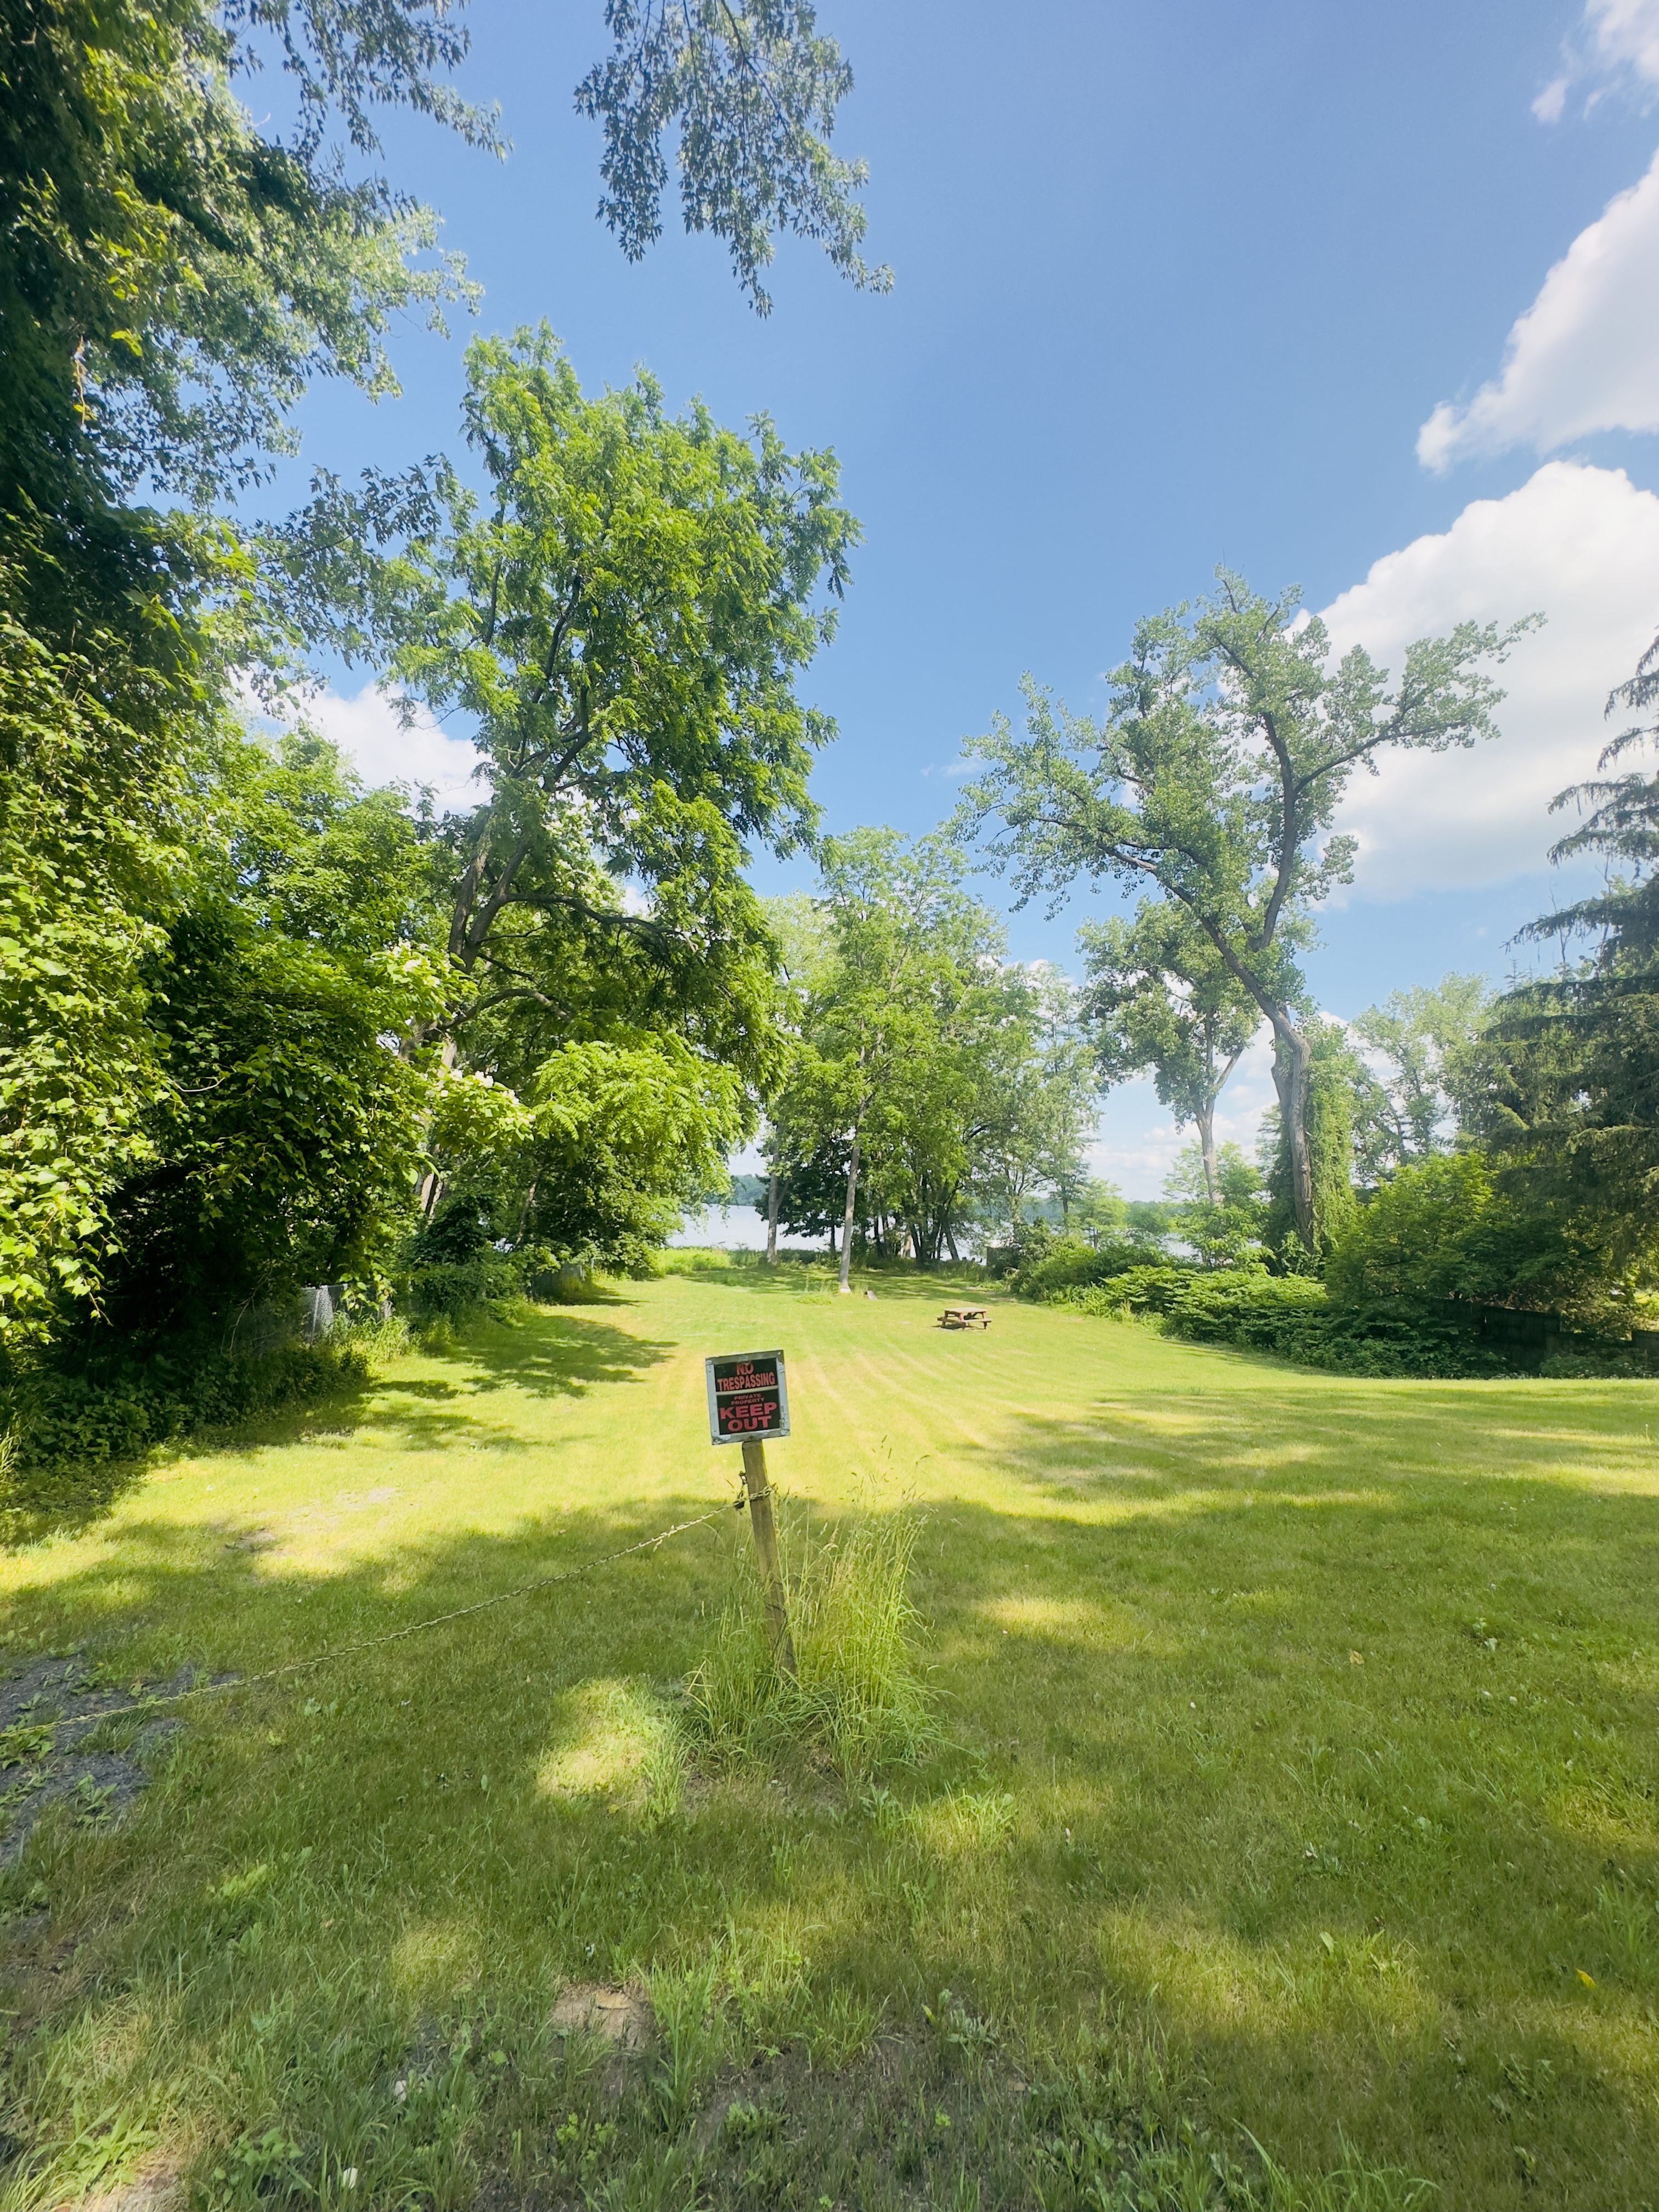 S. River Street, 12051, ,Land,For sale,S. River Street,1515